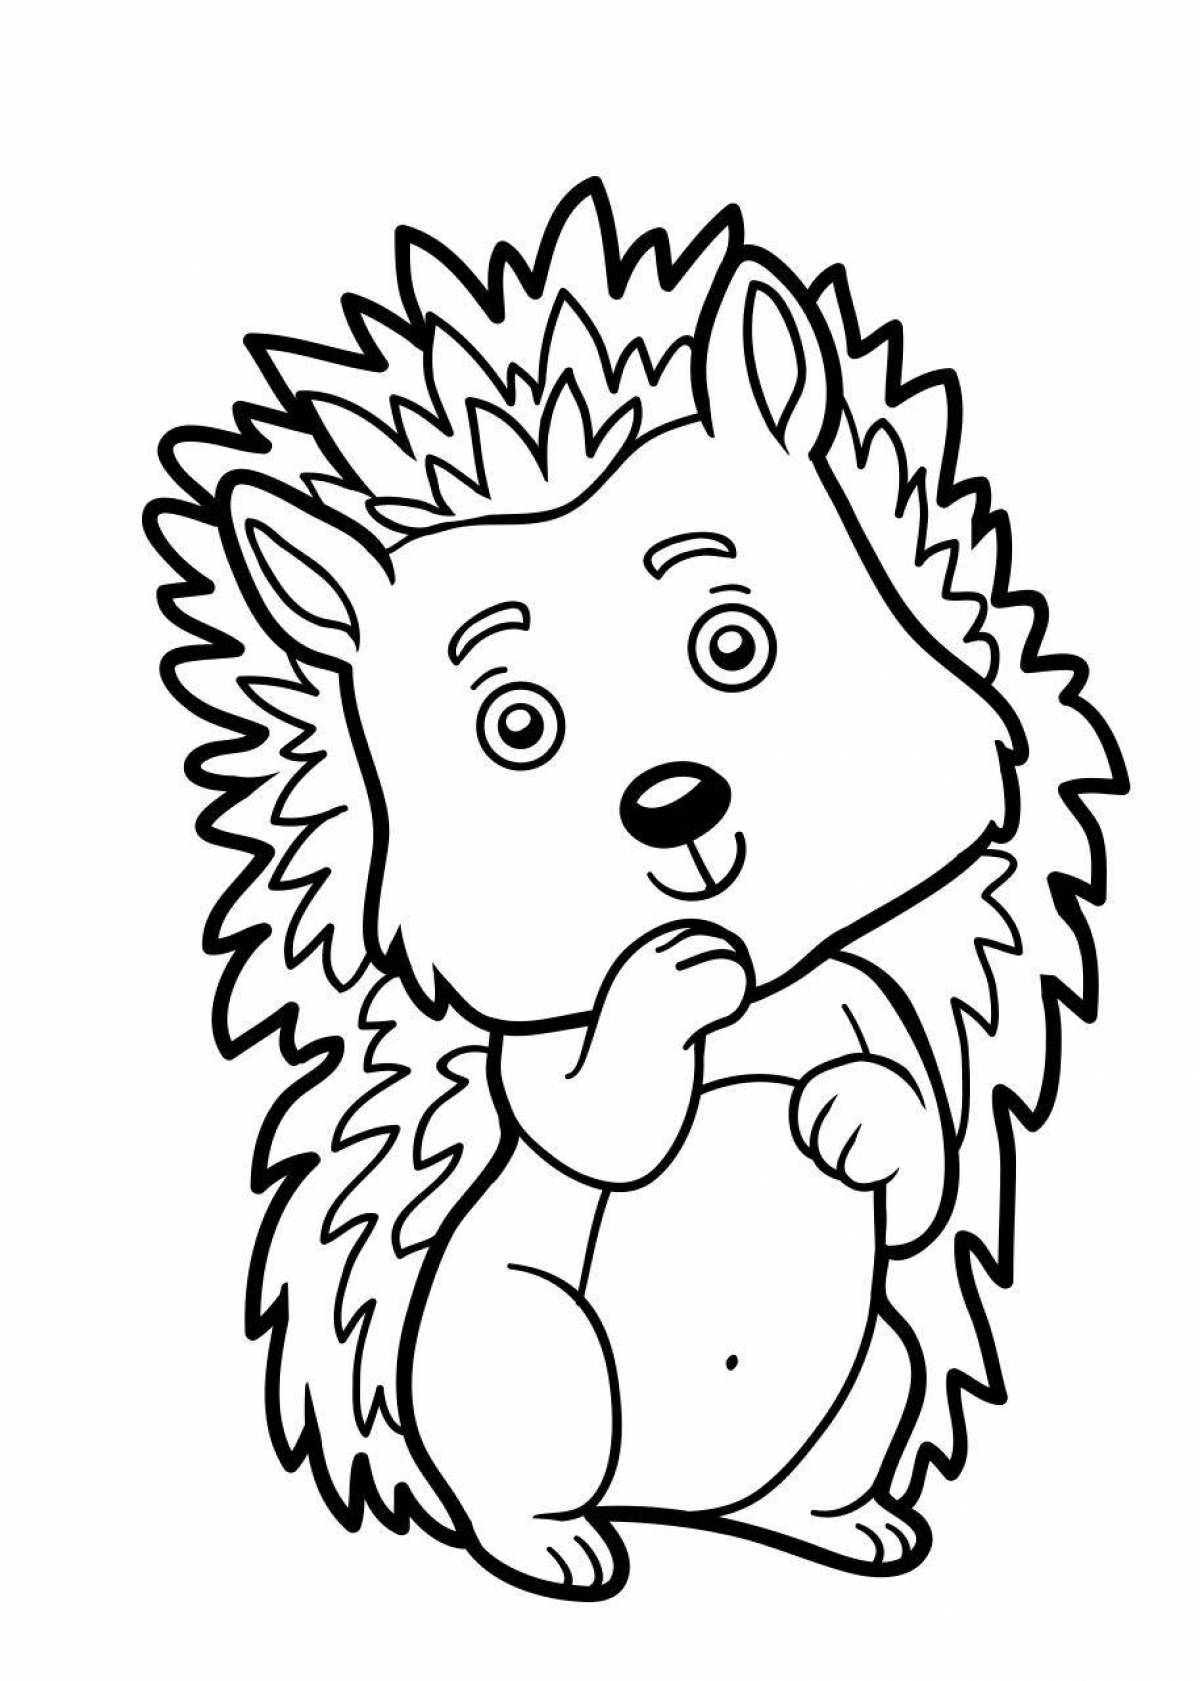 Adorable and fluffy hedgehog coloring book